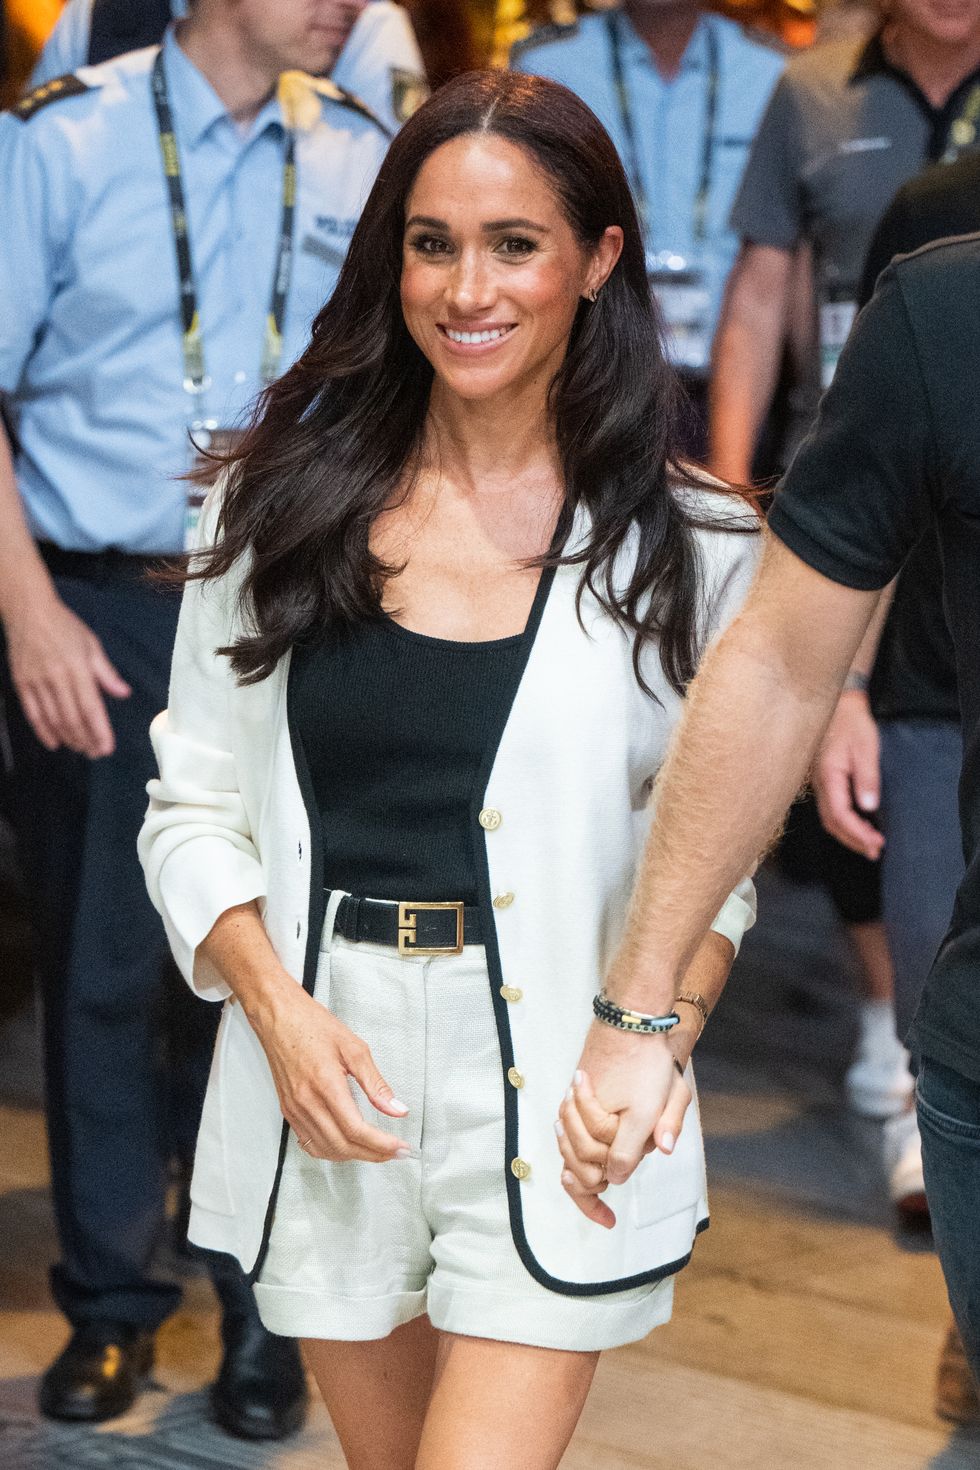 Polo Ralph Lauren Cable-Knit Cotton Sweater Vest in White - Meghan Markle's  Tops - Meghan's Fashion